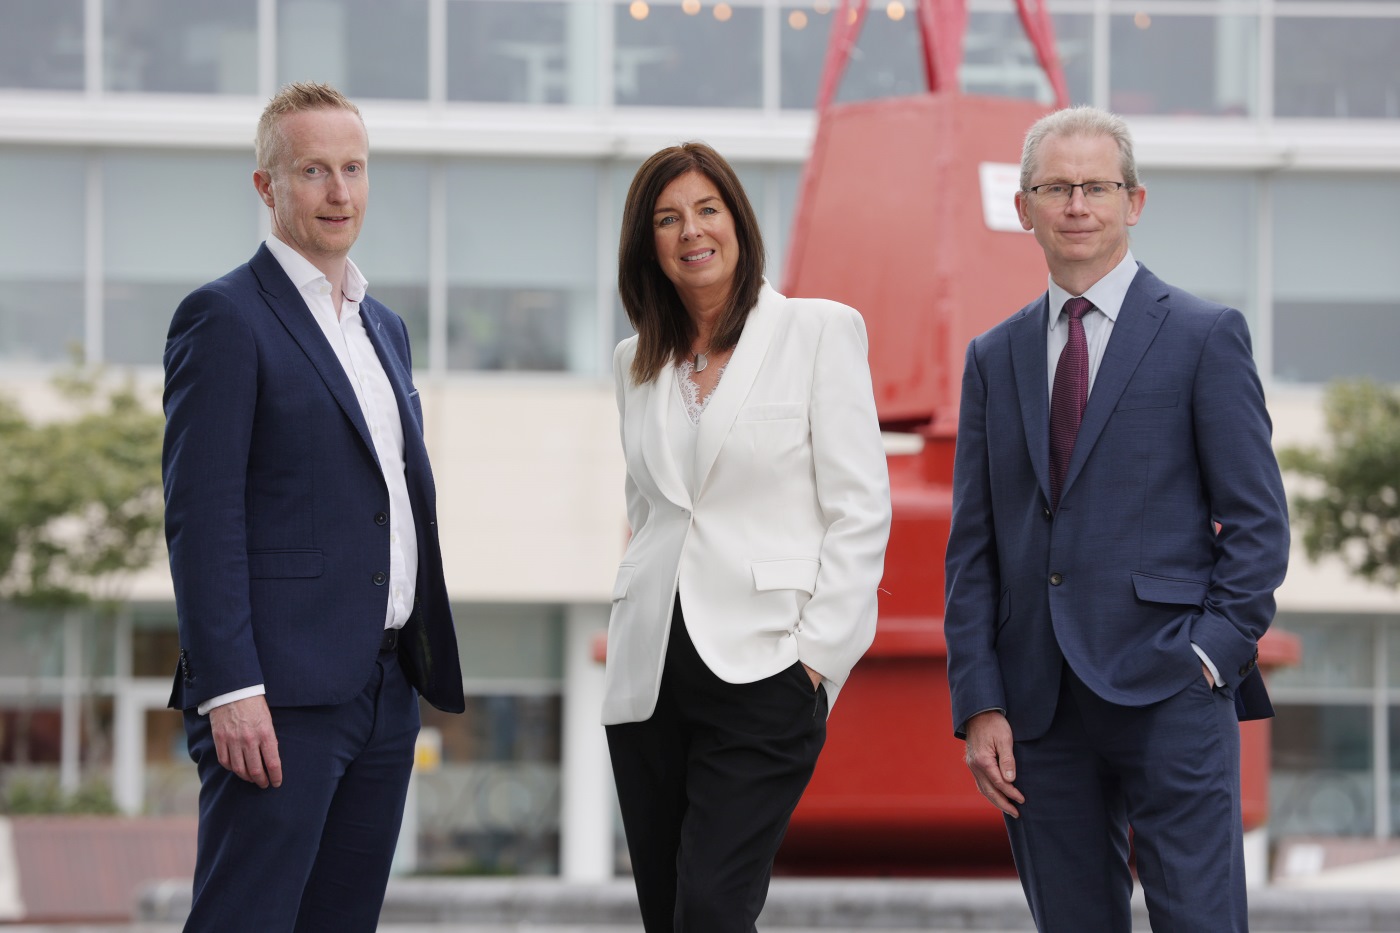  From left Niall Devlin, head of business banking at Bank of Ireland UK; Denise Sidhu, partner at Kernel Capital; and Cirdan director Stephen Dunniece